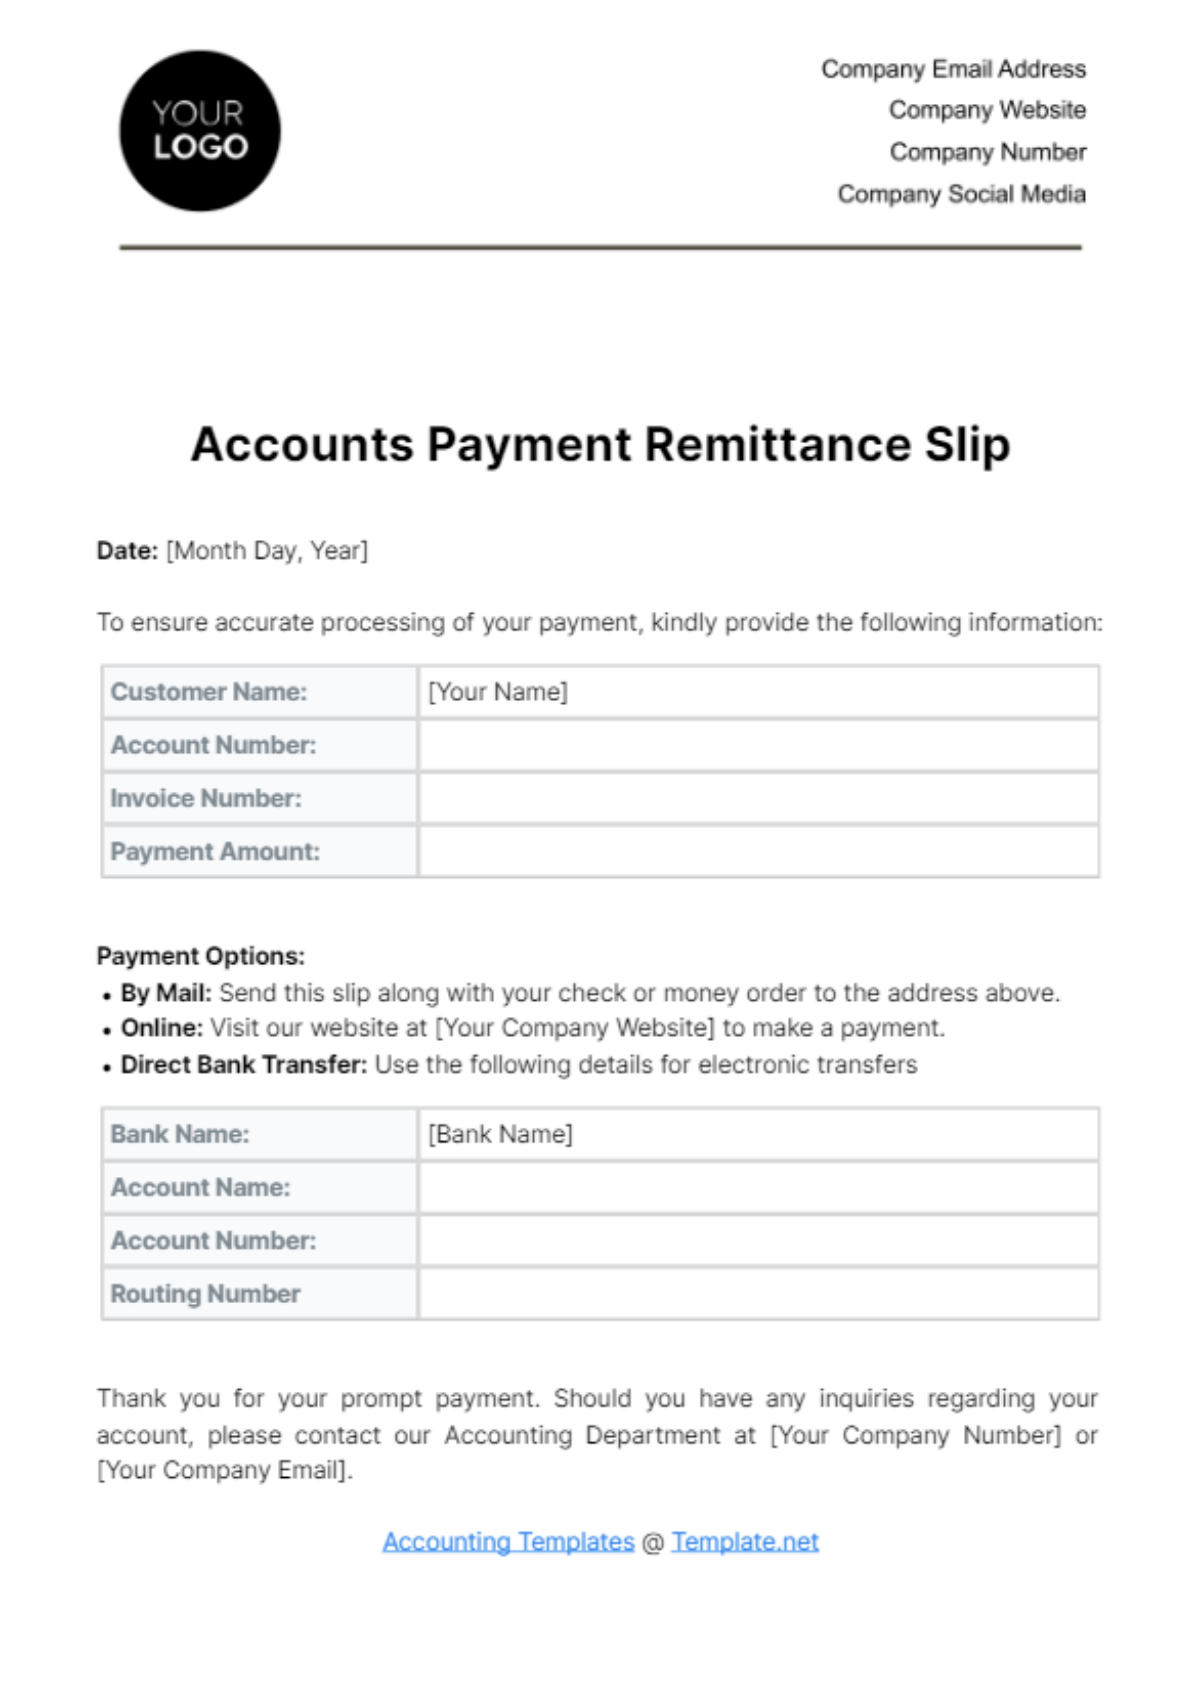 Free Accounts Payment Remittance Slip Template